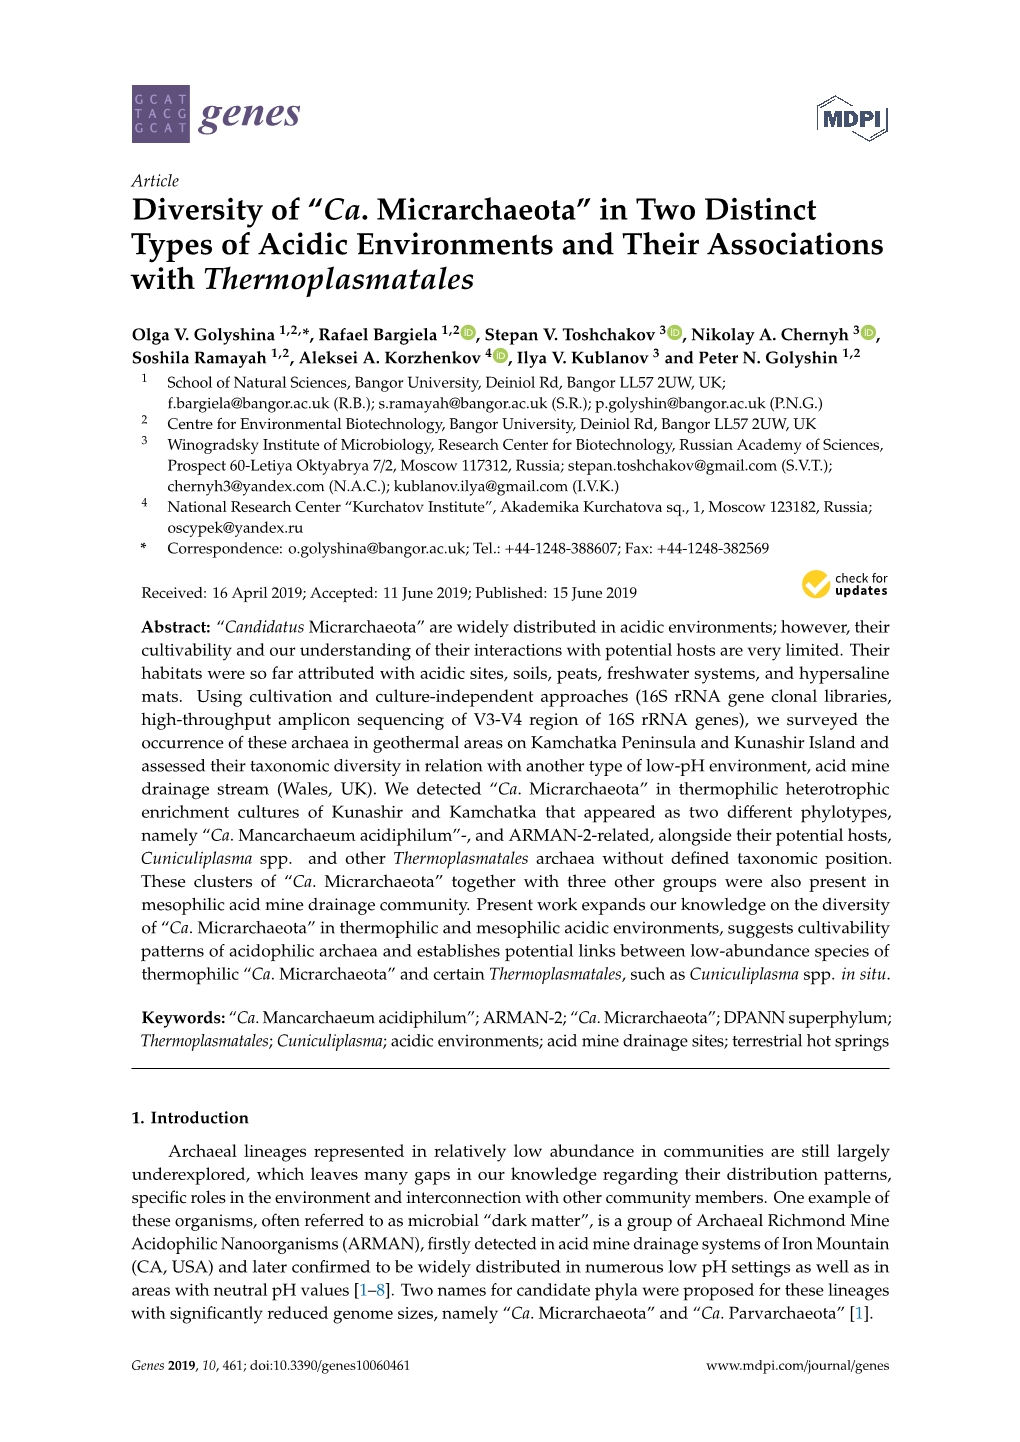 “Ca. Micrarchaeota” in Two Distinct Types of Acidic Environments and Their Associations with Thermoplasmatales